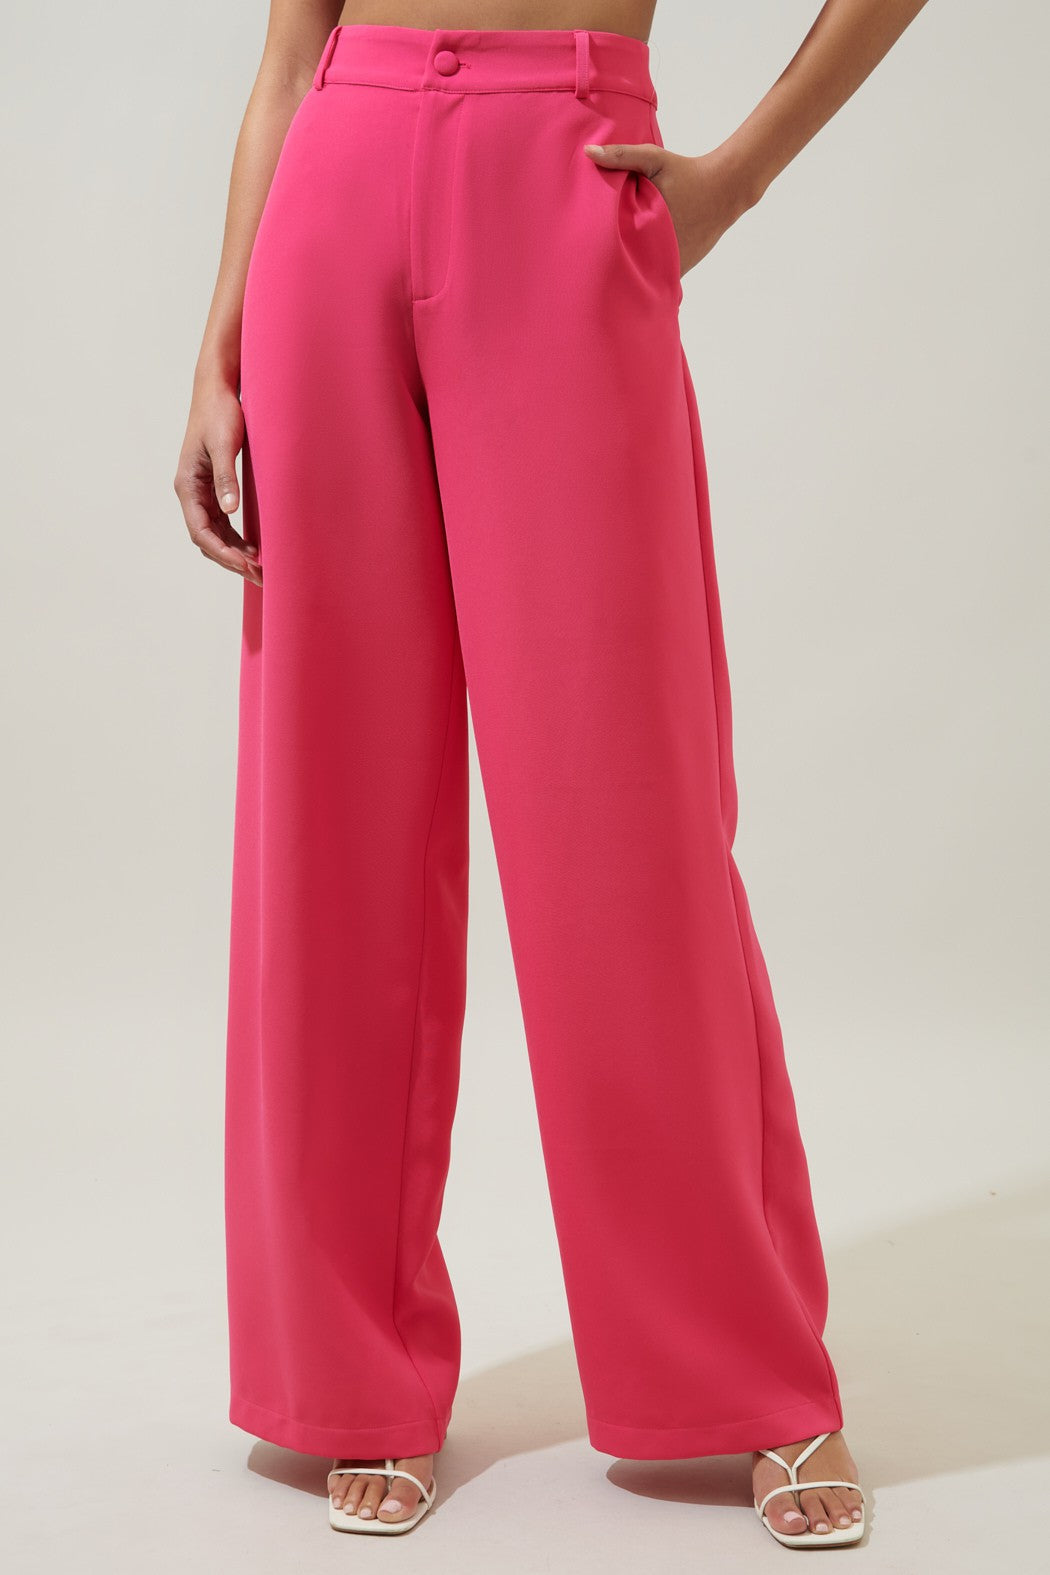 RICA SUAVE BELTED WIDE LEG TROUSERS - STP7276